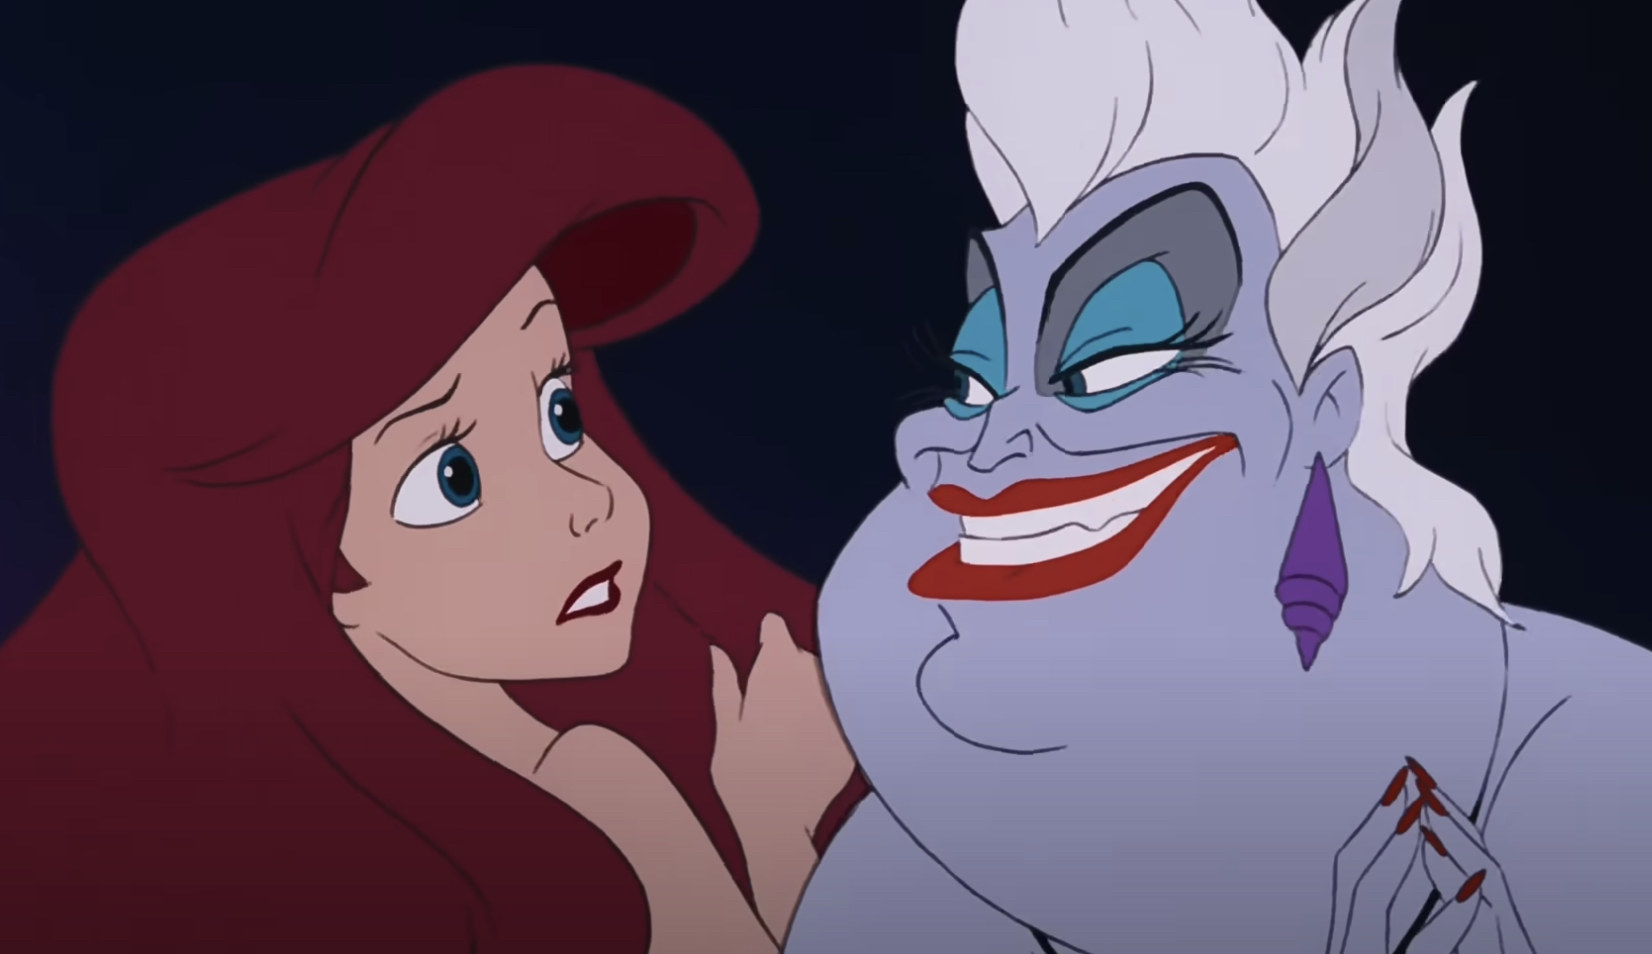 Ariel and Ursula face to face